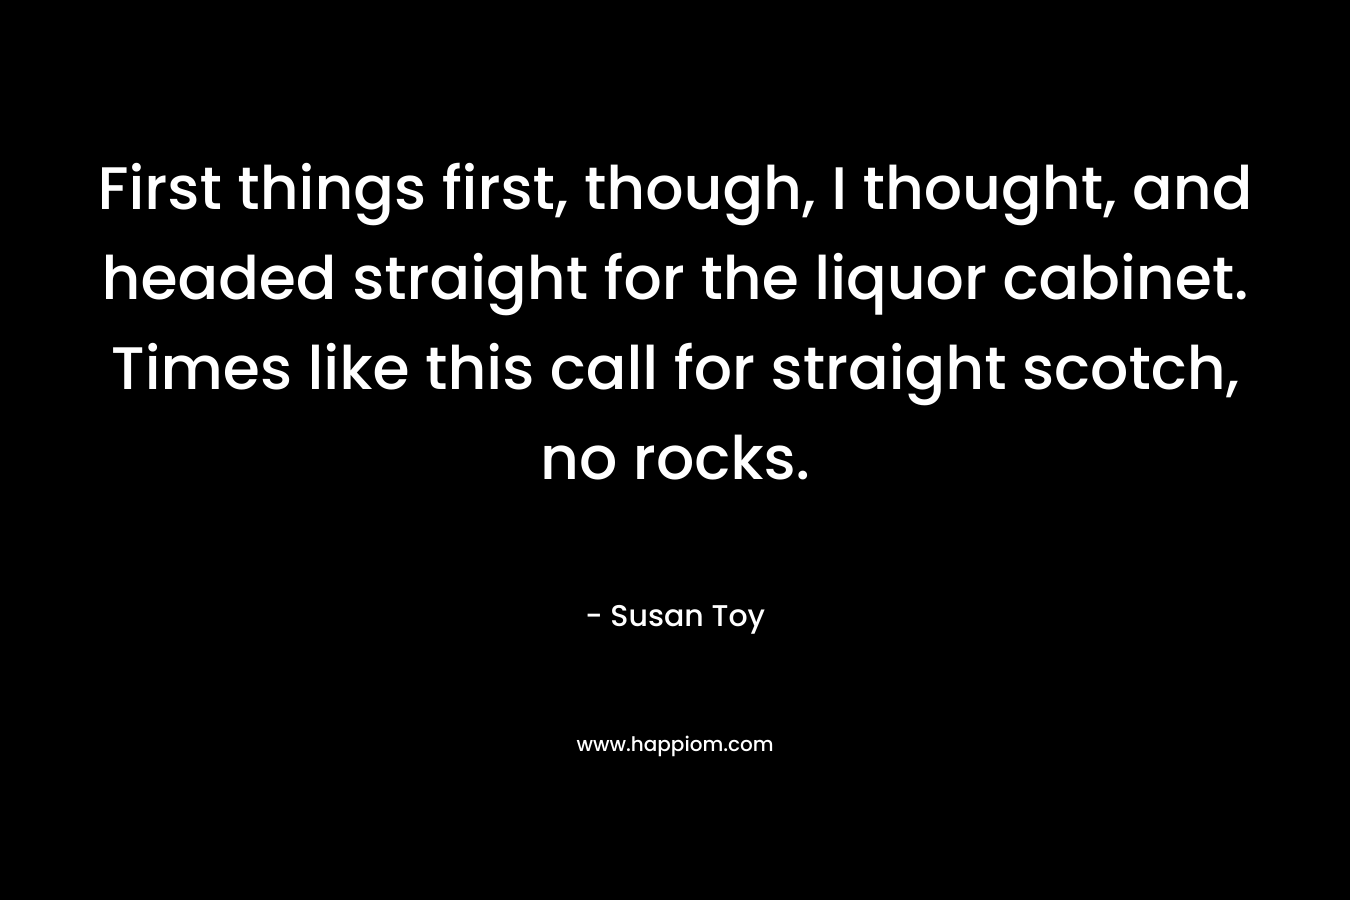 First things first, though, I thought, and headed straight for the liquor cabinet. Times like this call for straight scotch, no rocks. – Susan Toy